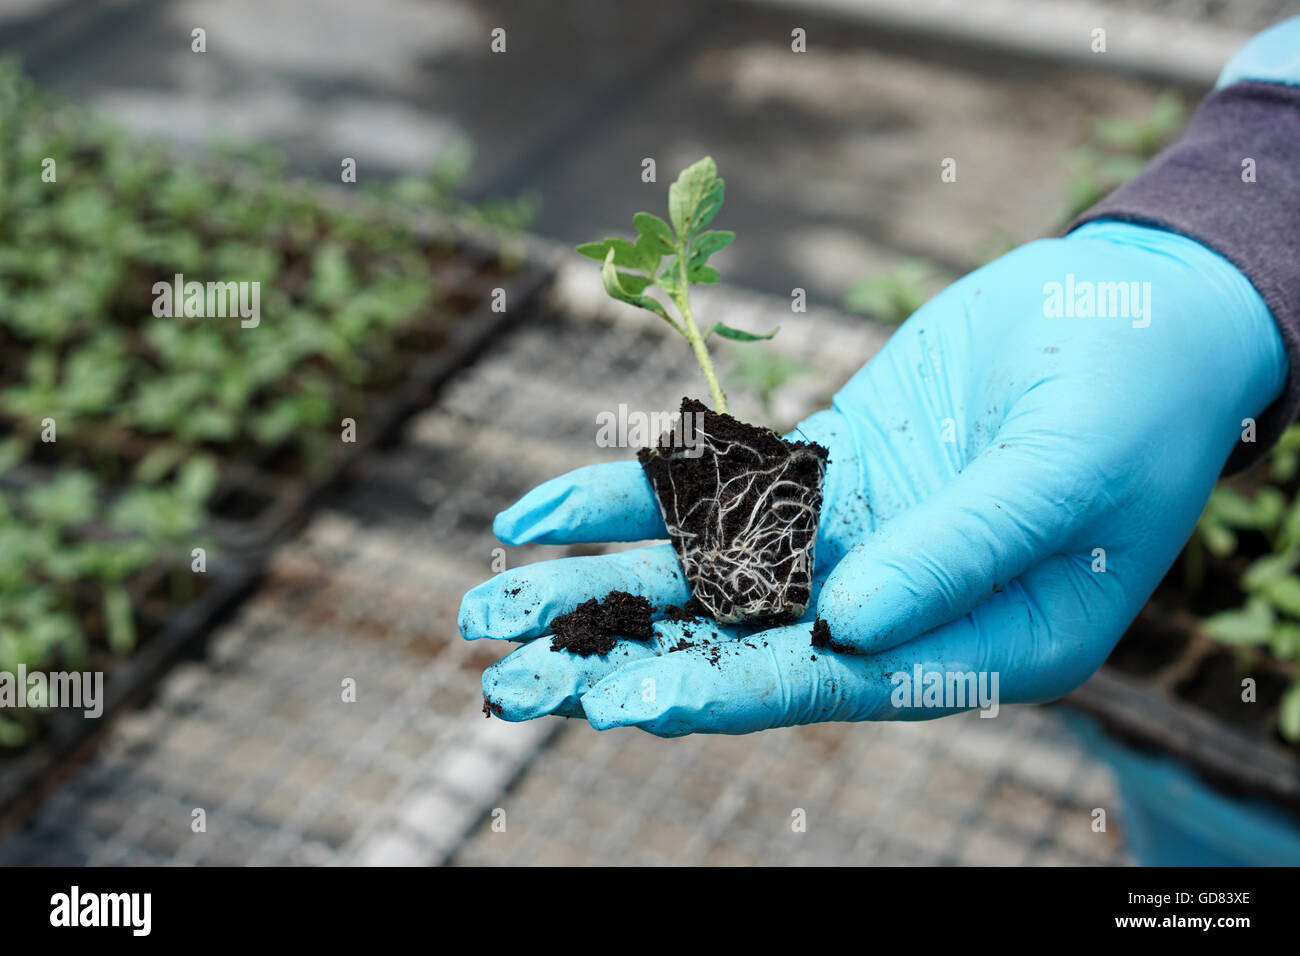 tomato seedling in hand with blue gloves Stock Photo